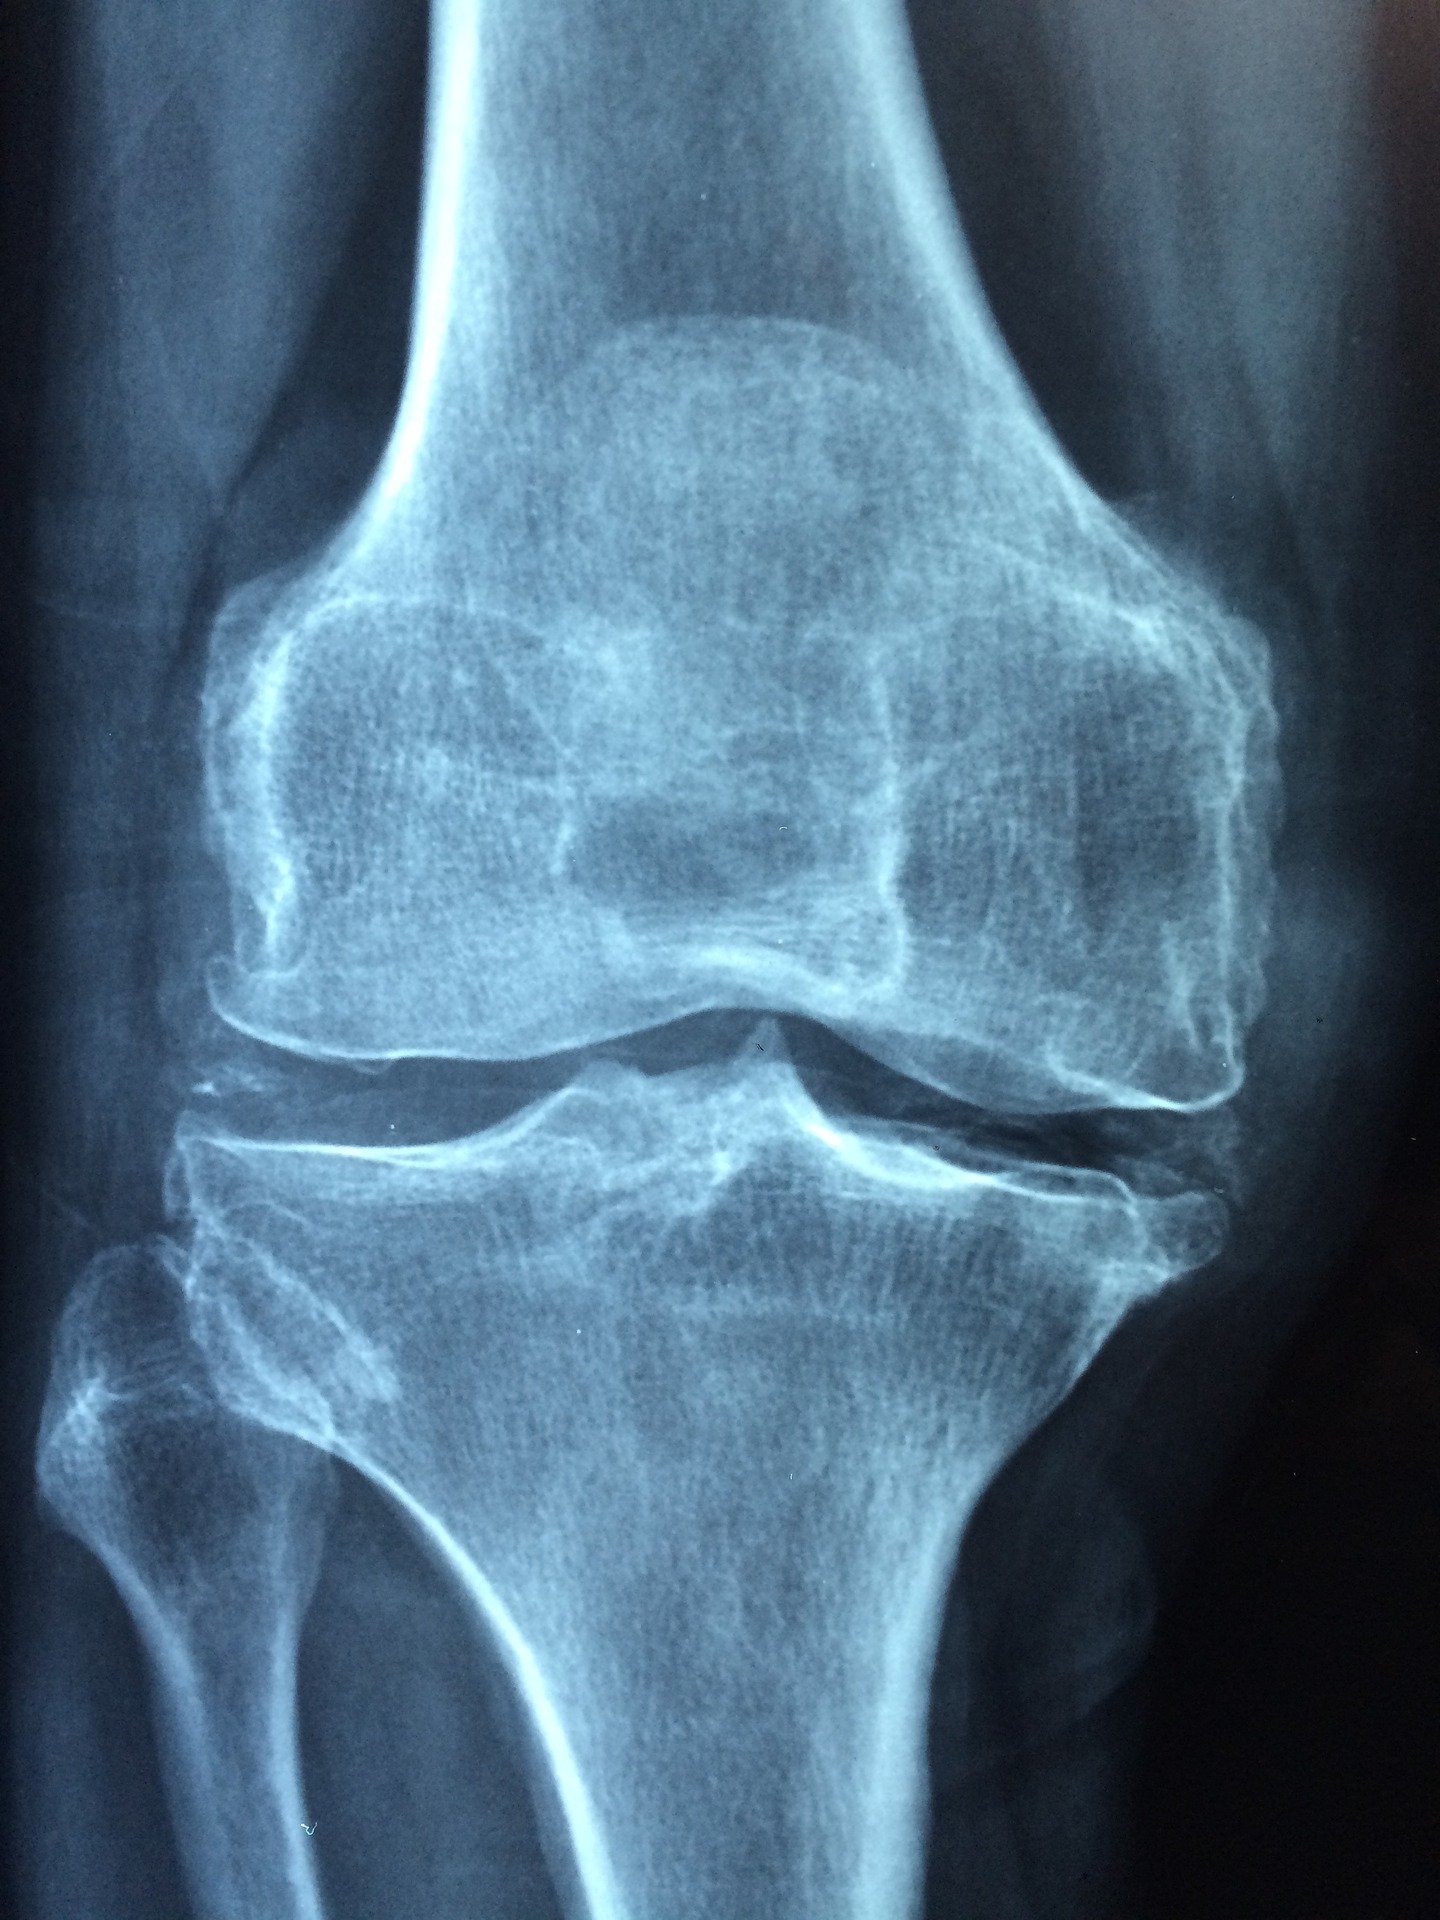 Knee joint scan